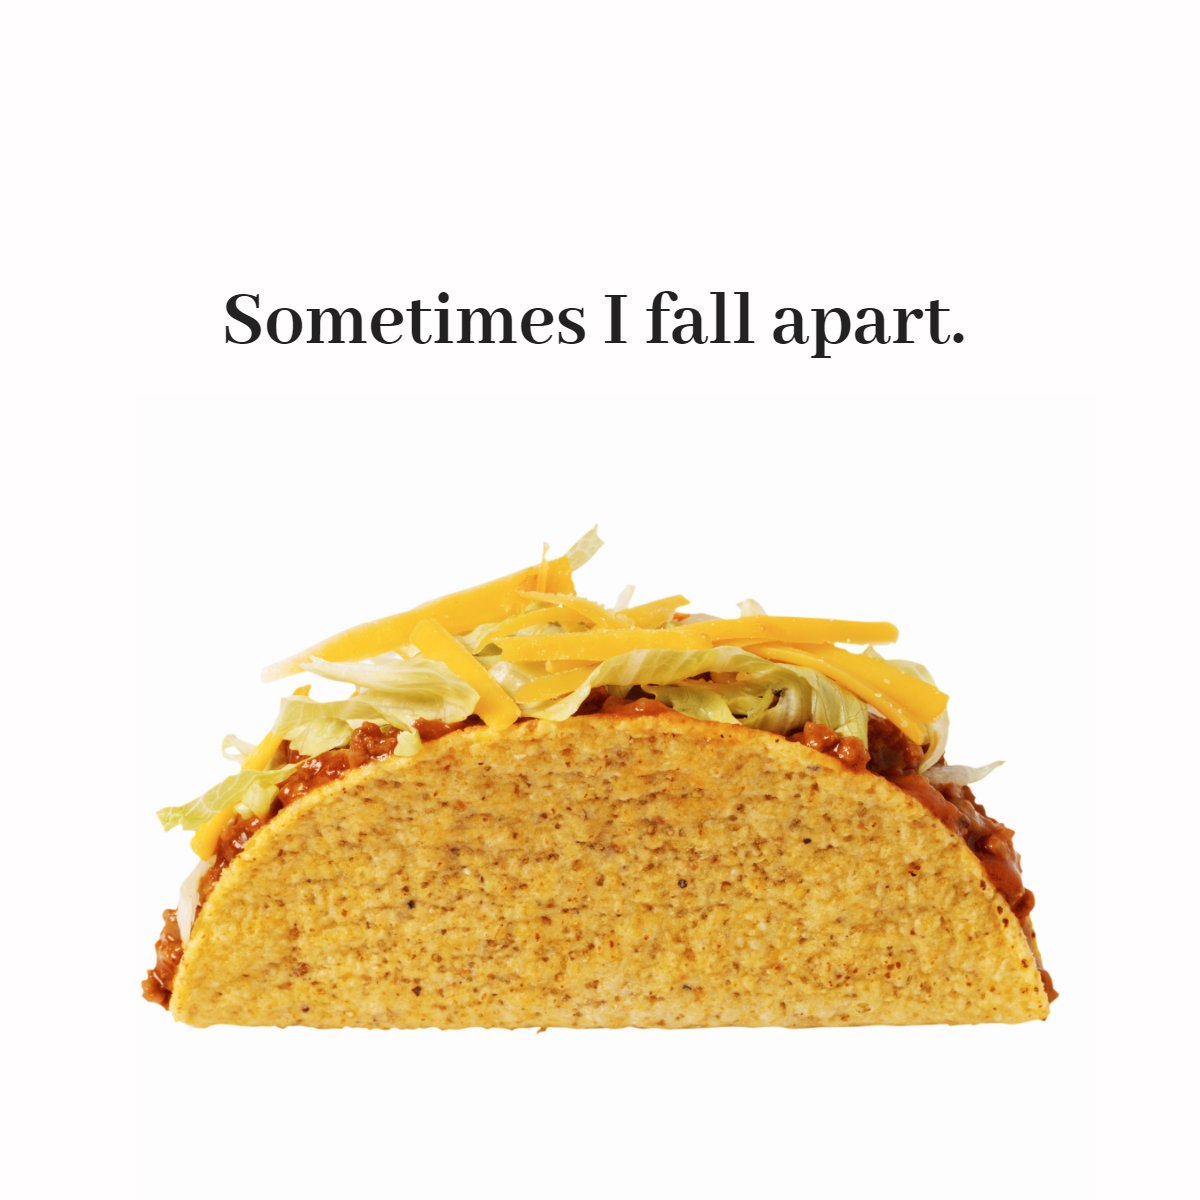 It’s ok if you fall apart sometimes.

Tacos fall apart and we still love them. 🌮 ❤️

#itsokay #fun #funnyinspo #taco #tacolover #instaquotes
 #AskDomailleRealEstate #LoveWhereYouLive #RochesterMNRealEstate #ByronMNRealEstate #ByronMNRealtor #RochesterMNRealtor